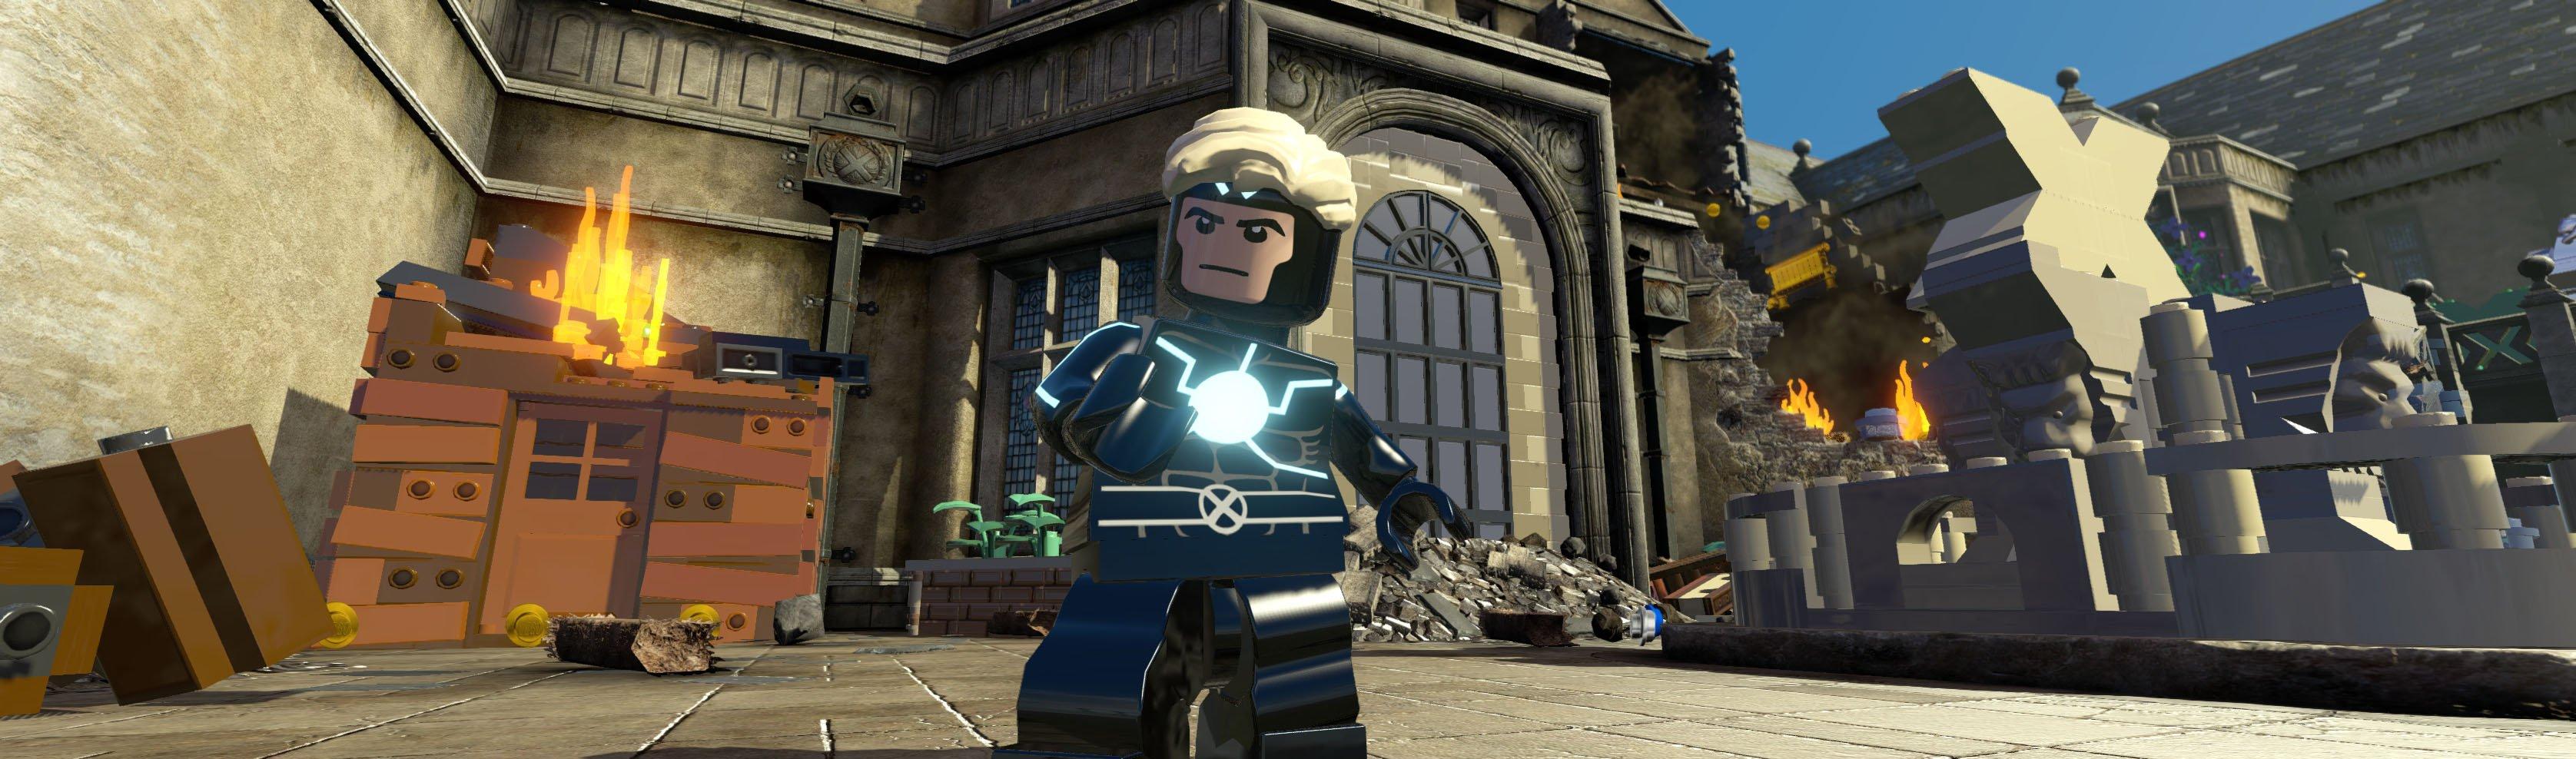  LEGO Marvel's Avengers - Xbox 360 : Whv Games: Video Games